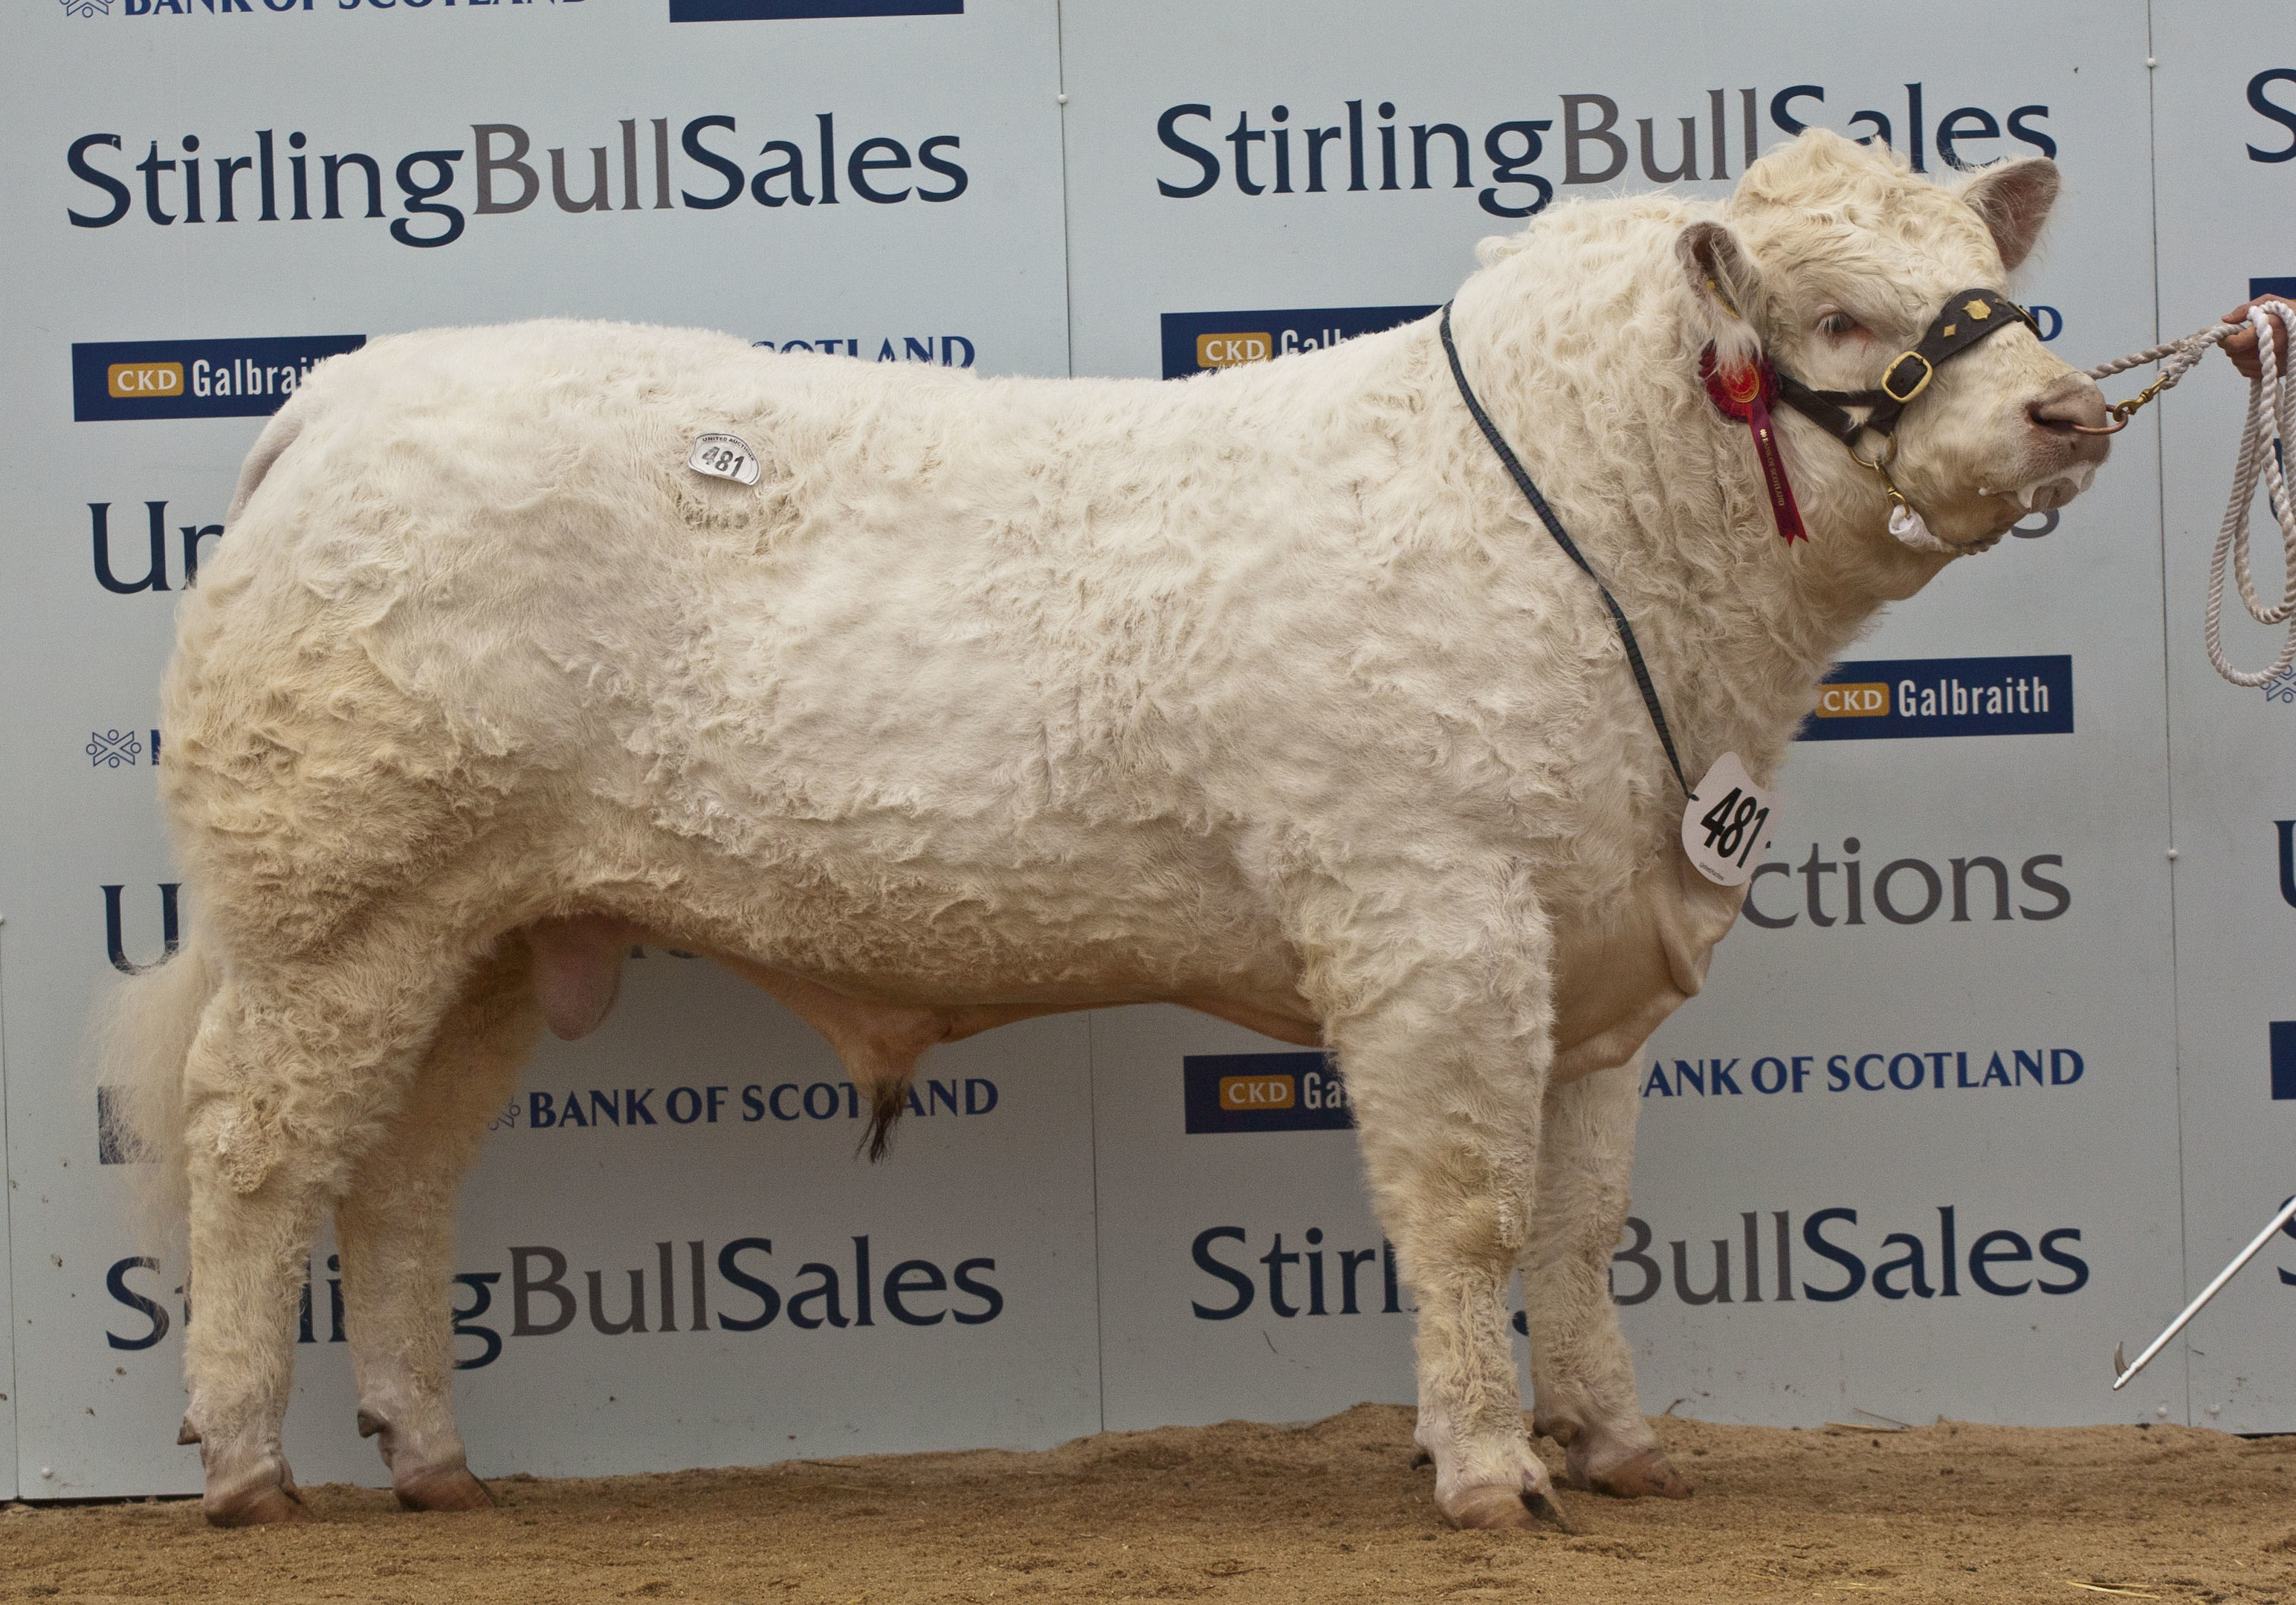 The top priced Charolais from Ronnie Mackay.